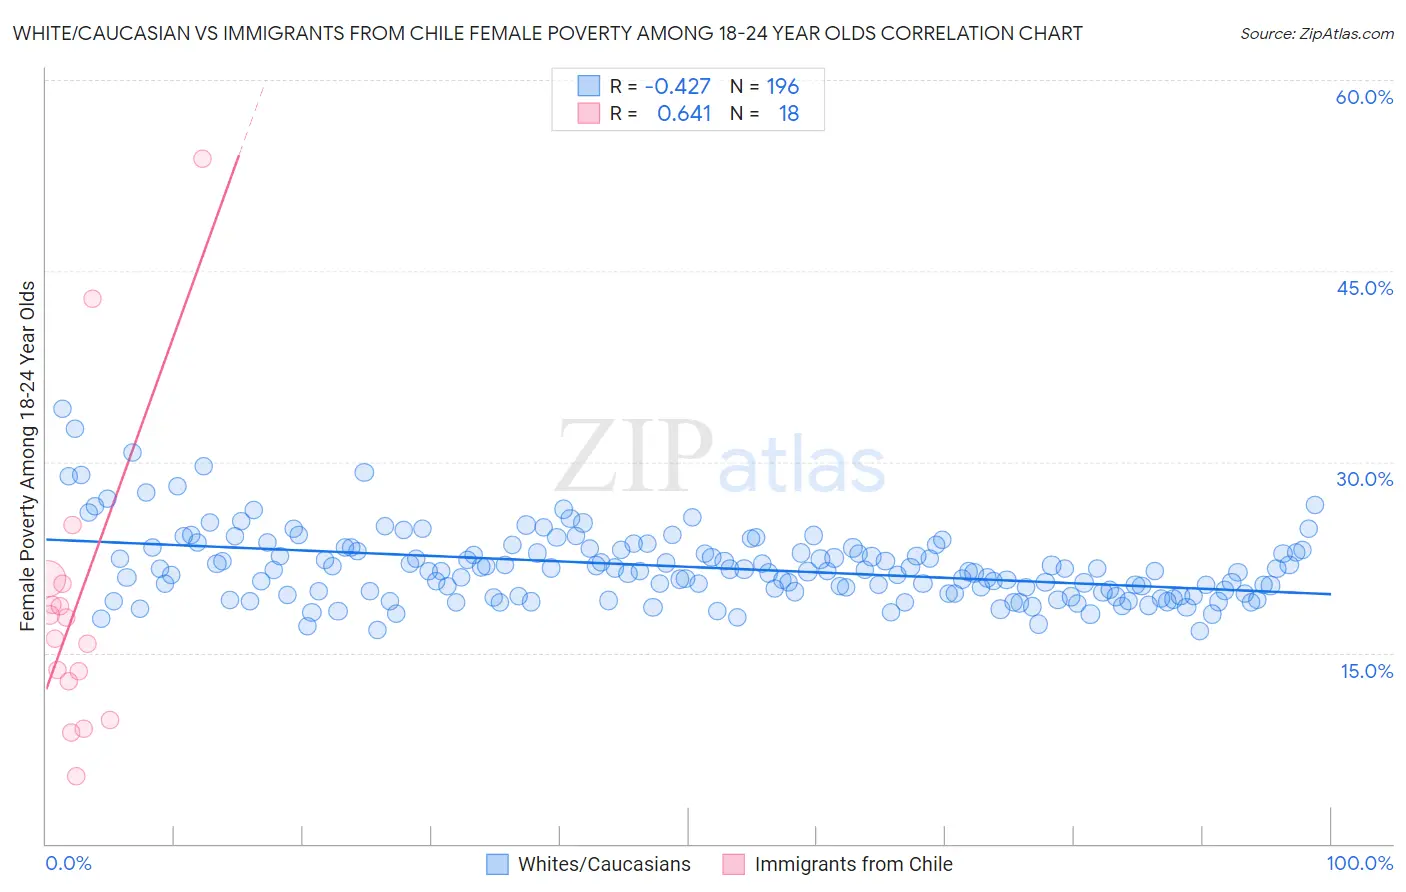 White/Caucasian vs Immigrants from Chile Female Poverty Among 18-24 Year Olds